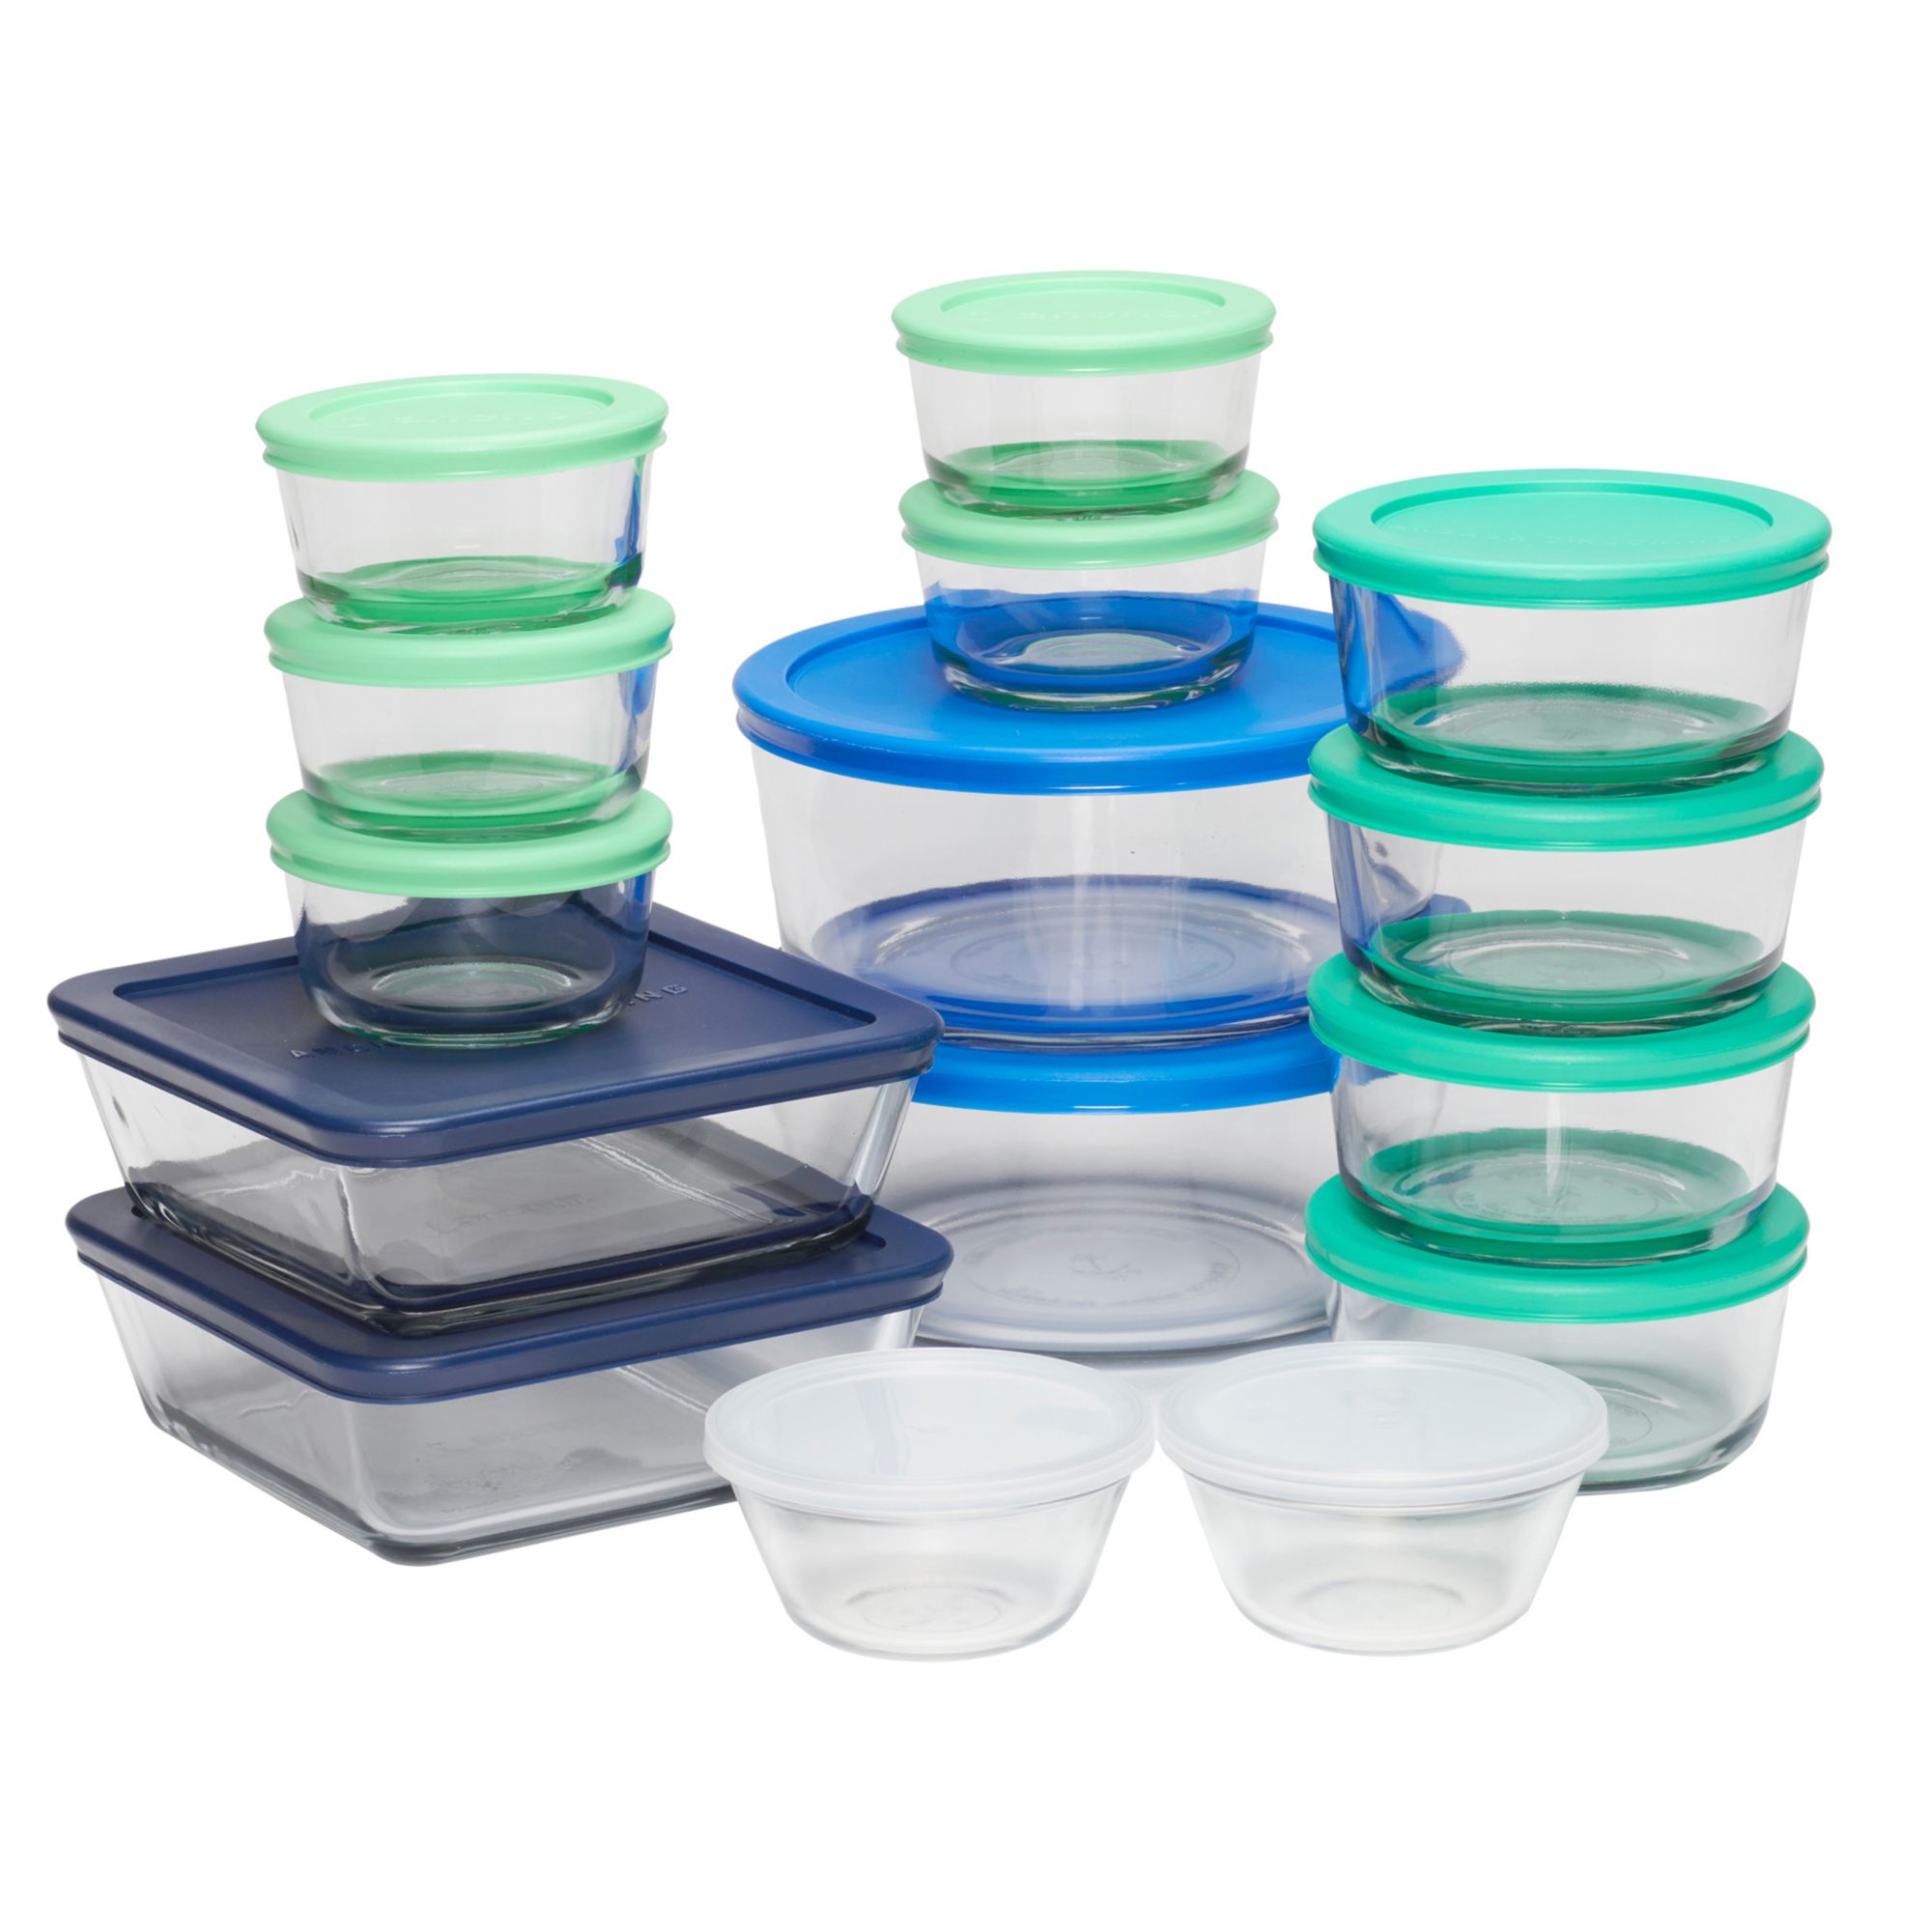 Anchor Hocking 30 pc. Glass Food Storage Set with SnugFit Lids - Clear